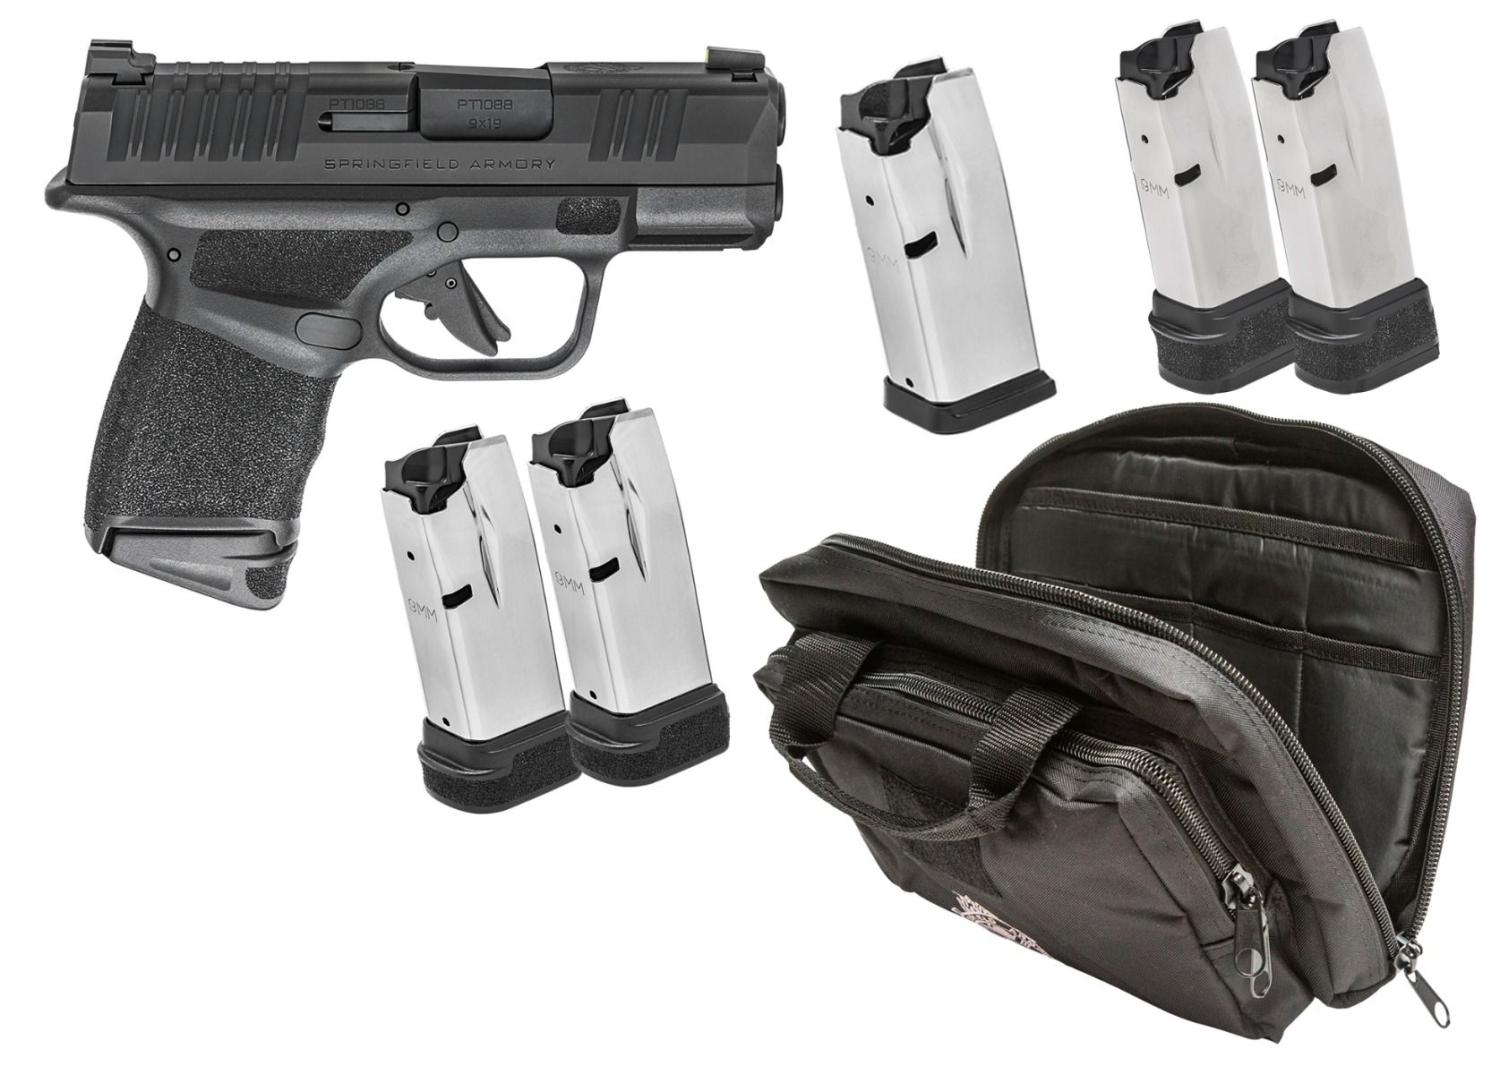 Springfield Armory Hellcat 9mm Pistol Micro-compact 3" 11/13rd Gear Up - $499.99 